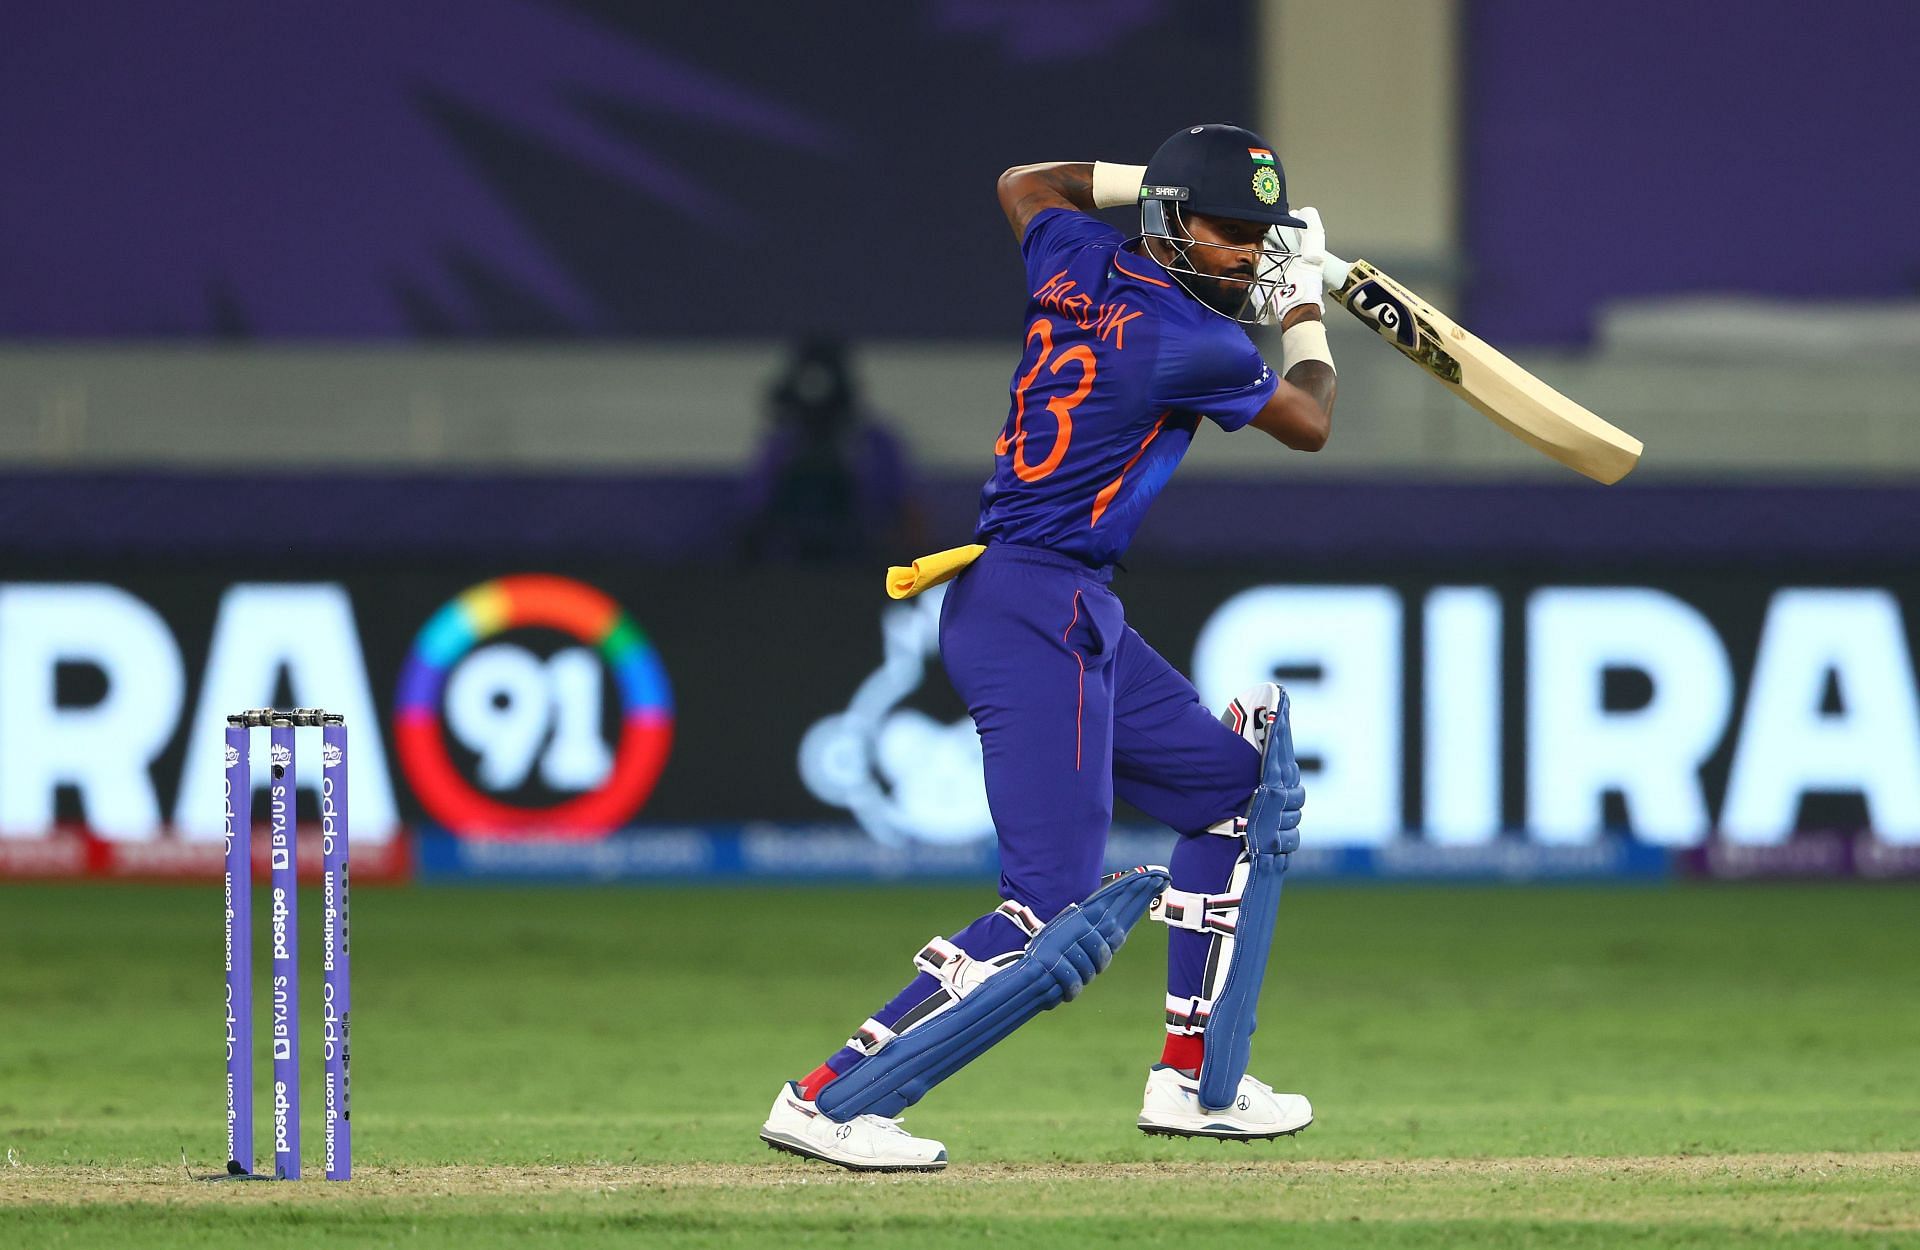 ICC T20 World Cup 2021: Watch: Hardik Pandya collides with Mohammad Shahzad during India’s clash against Afghanistan